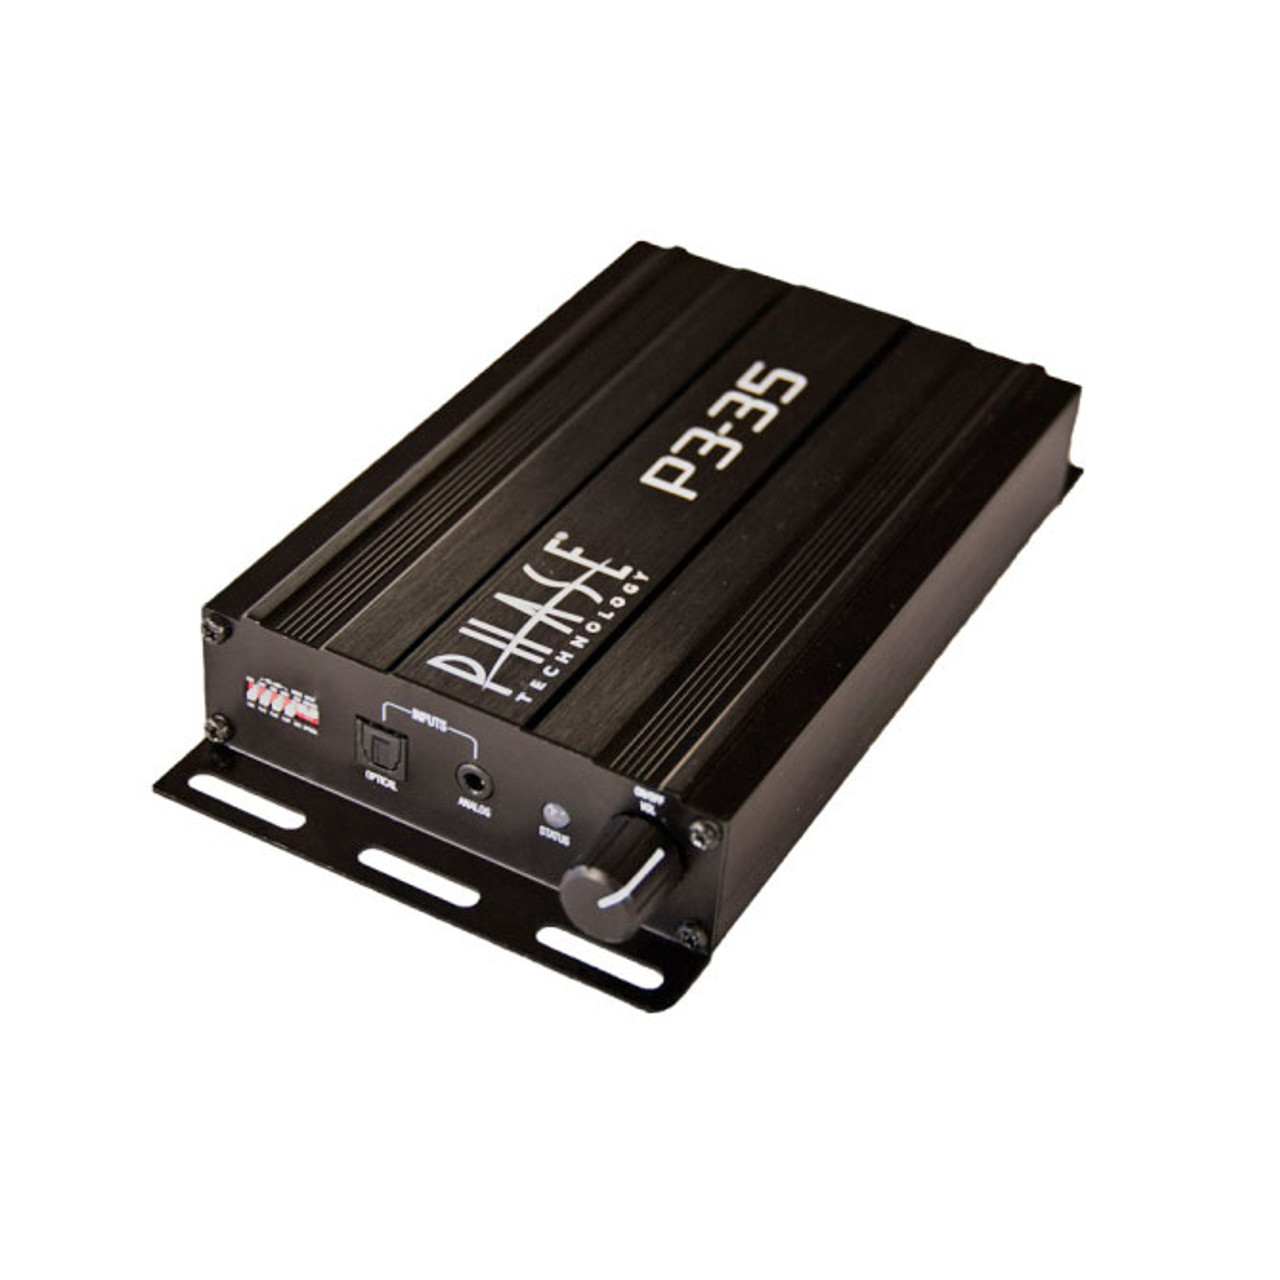  Phase Technology P3-35 3.9" x 7.25", 3-Channel Amplifier with Analog Input and IR Learning Capabilities (P3-35)